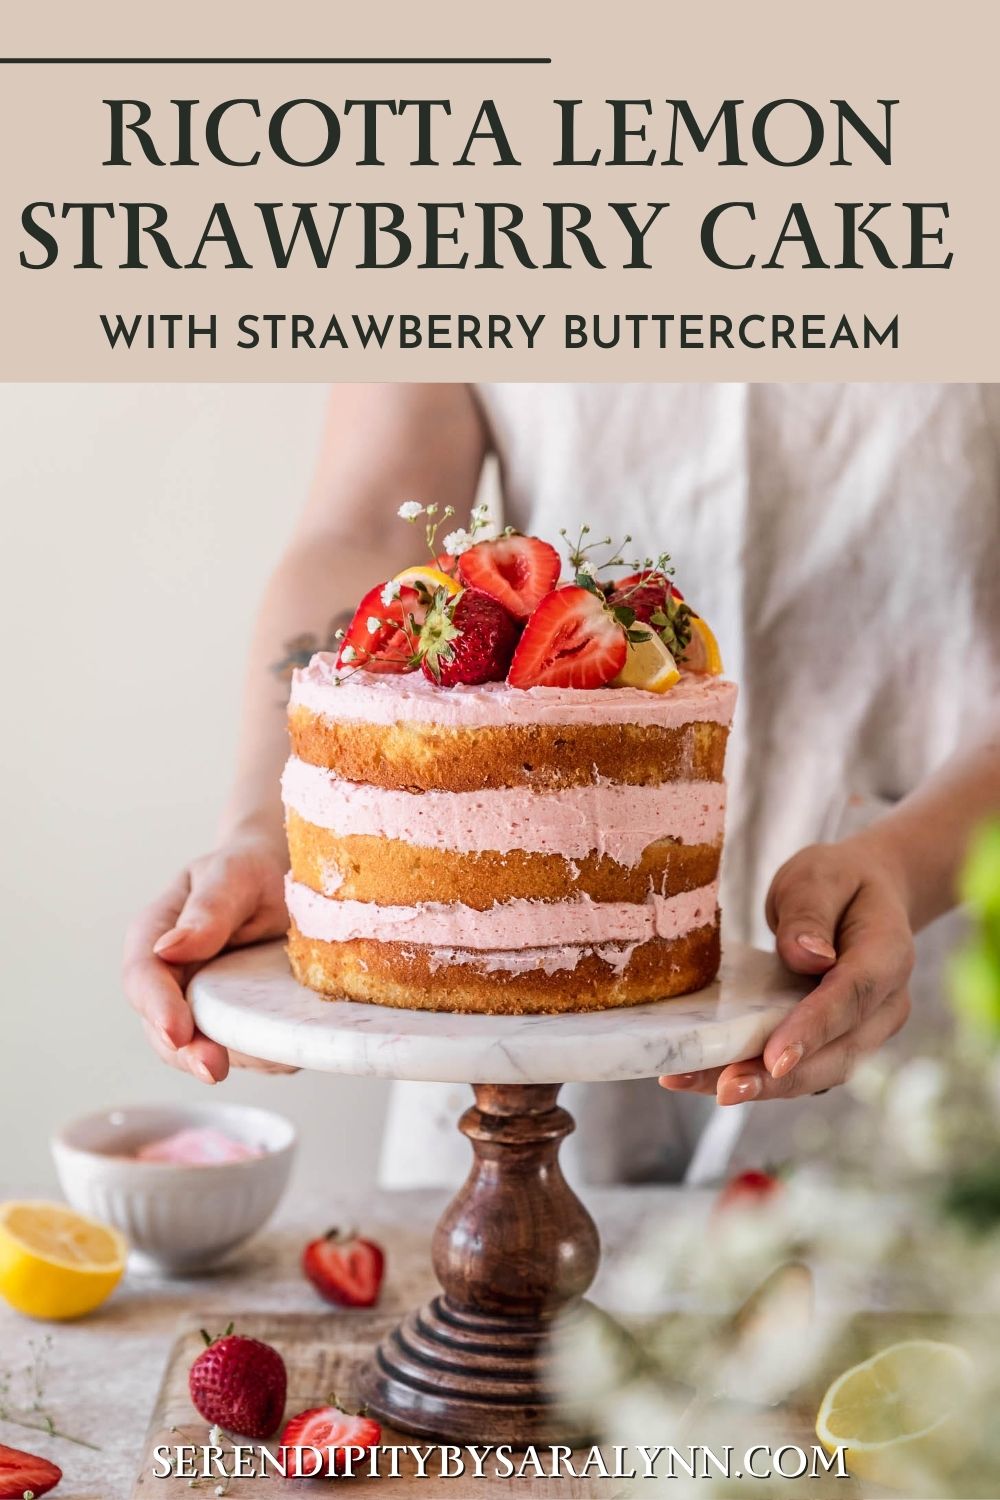 A woman with a beige apron holding a marble cake stand with ricotta strawberry lemon cake on a beige table next to a bouquet of white flowers.